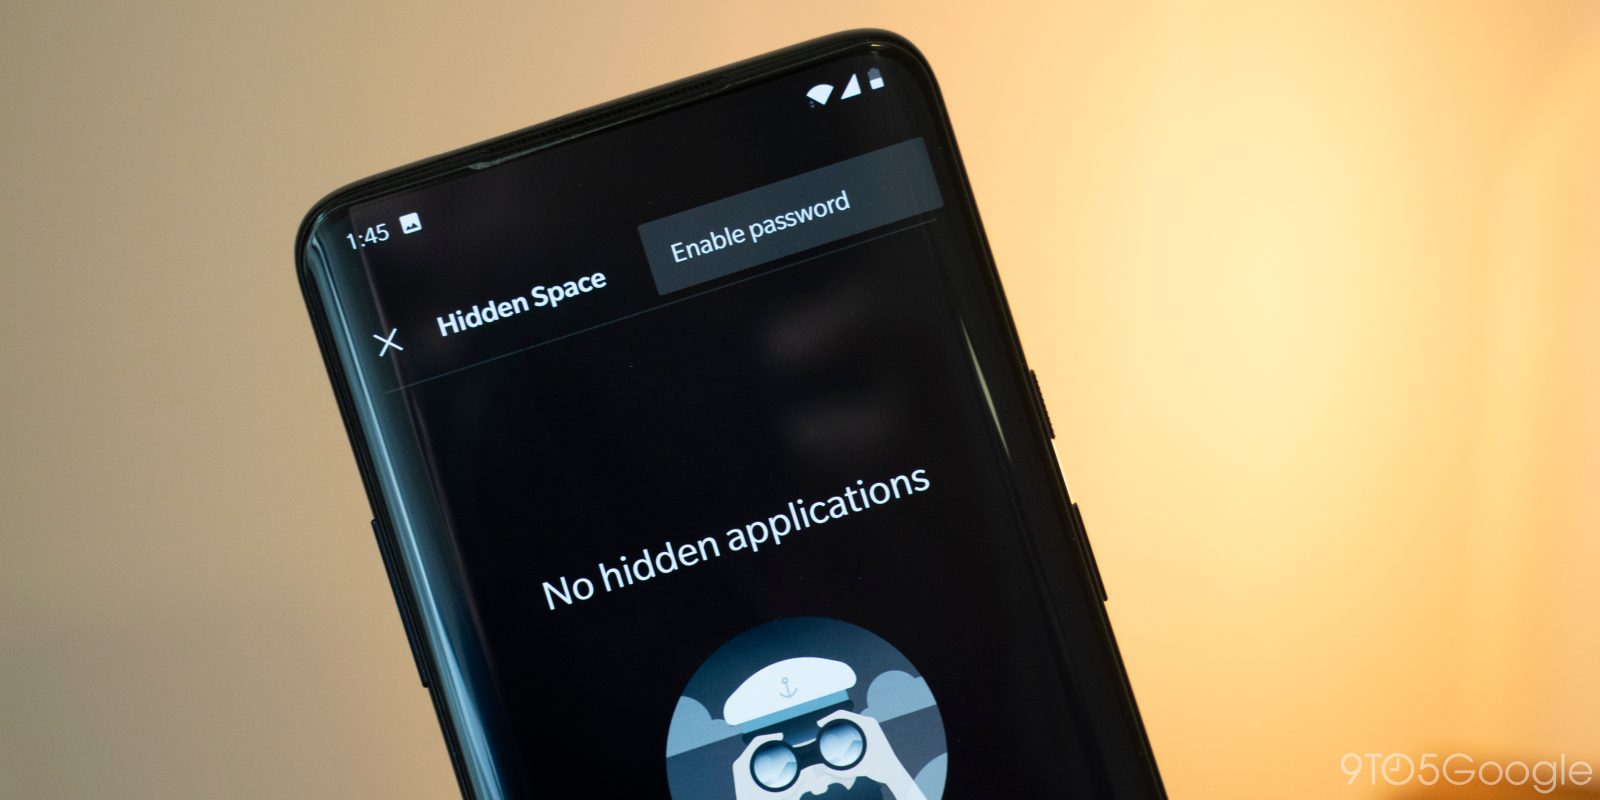 OnePlus Launcher supports a password for 'Hidden Space' - 9to5Google